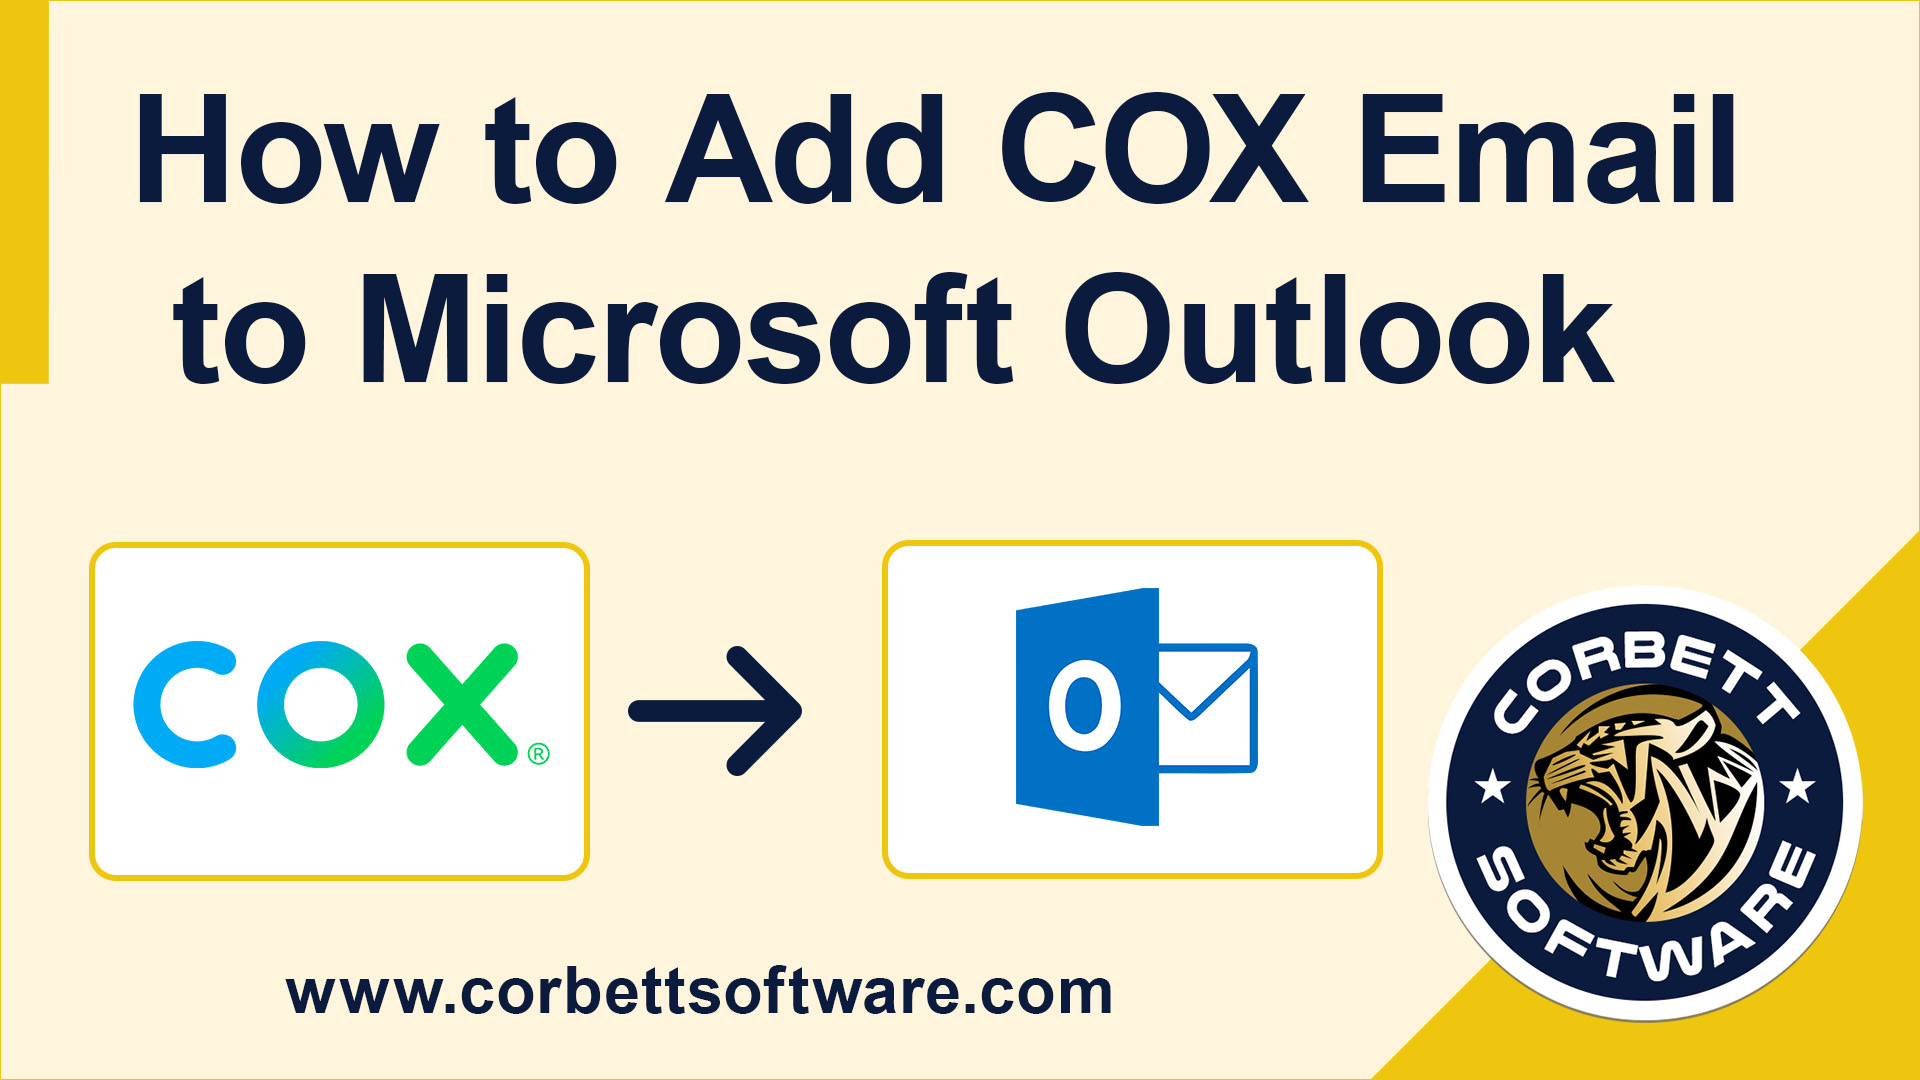 Add COX Email to Microsoft Outlook